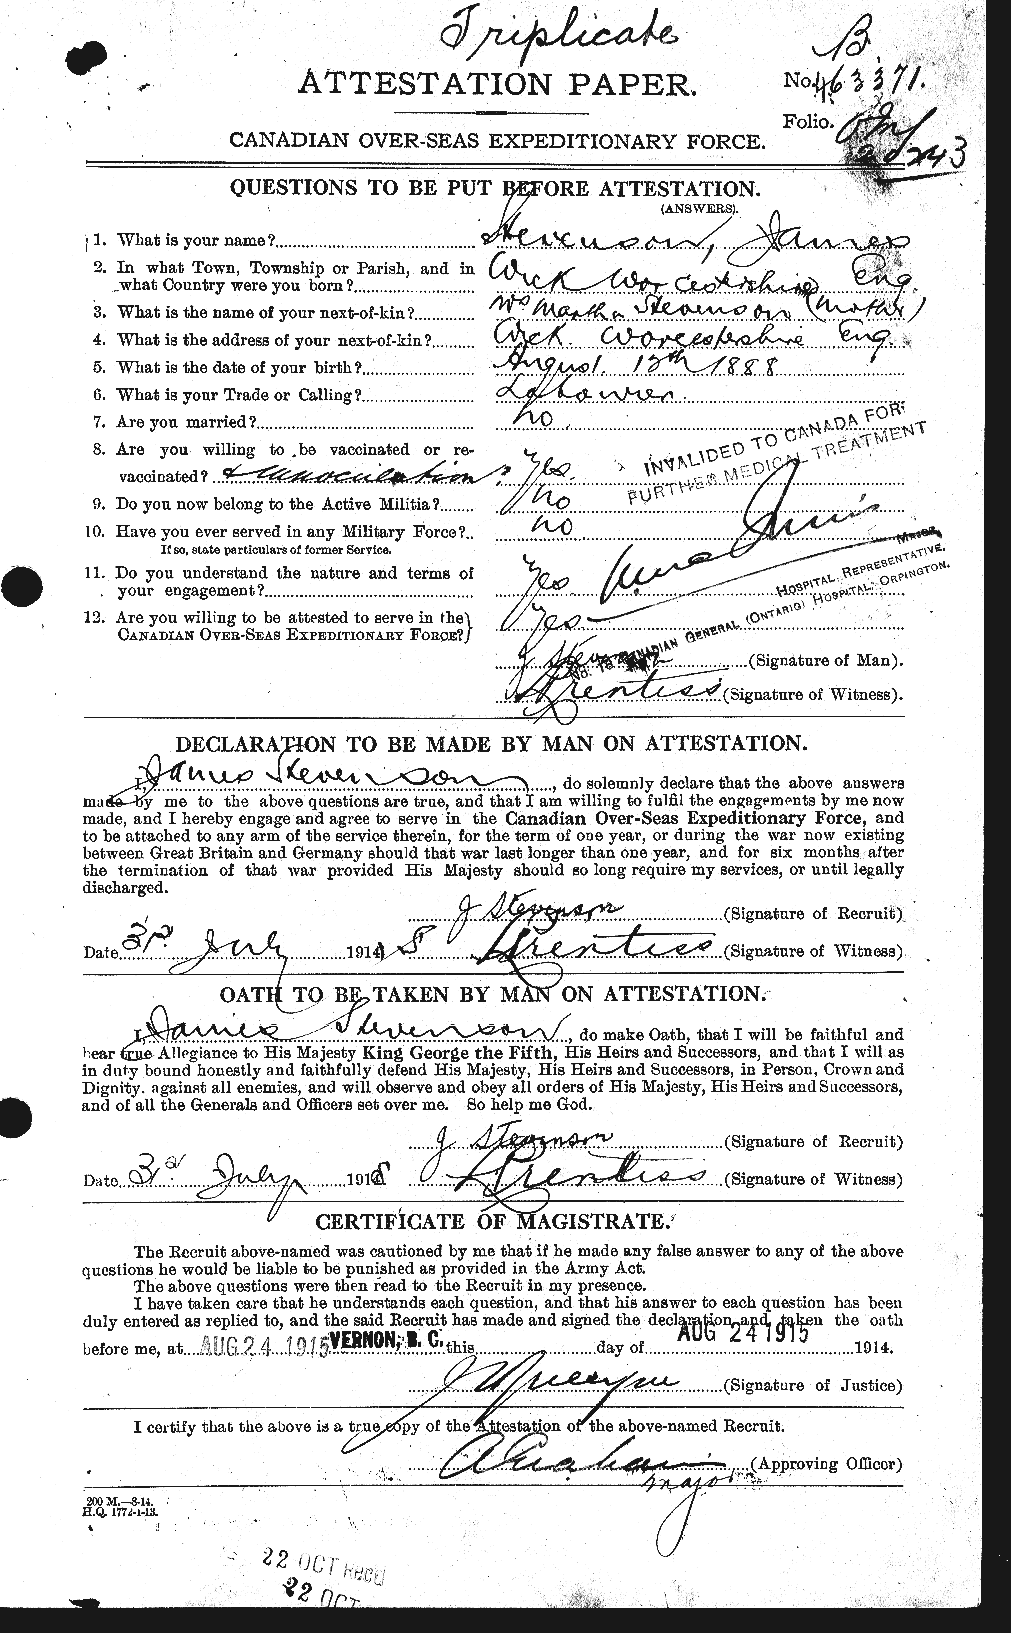 Personnel Records of the First World War - CEF 119022a